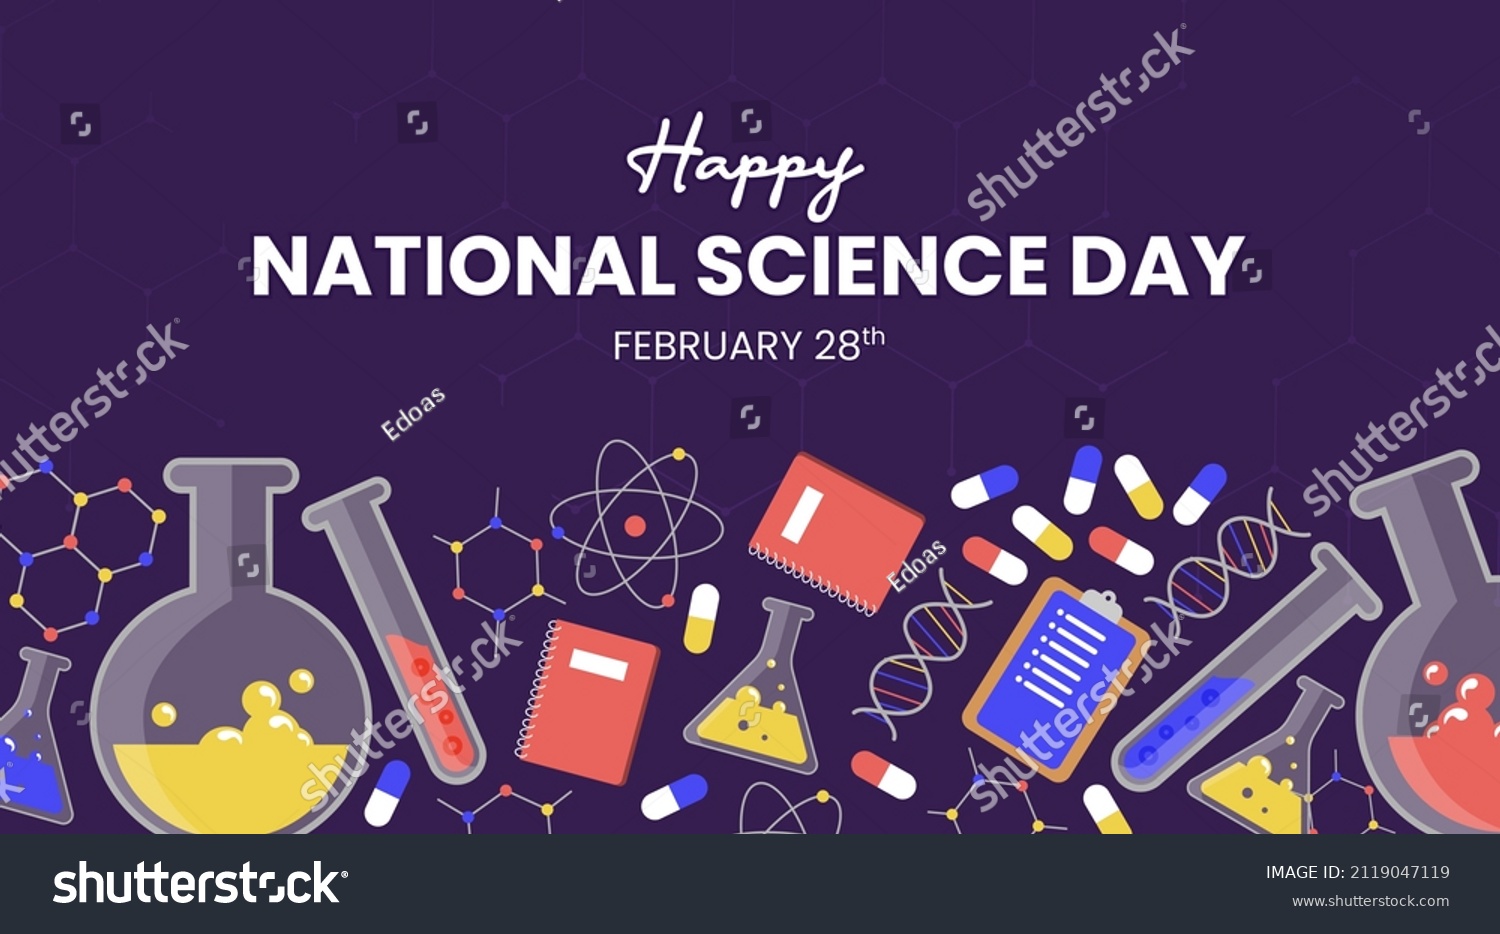 National Science day background design with science stuff #2119047119